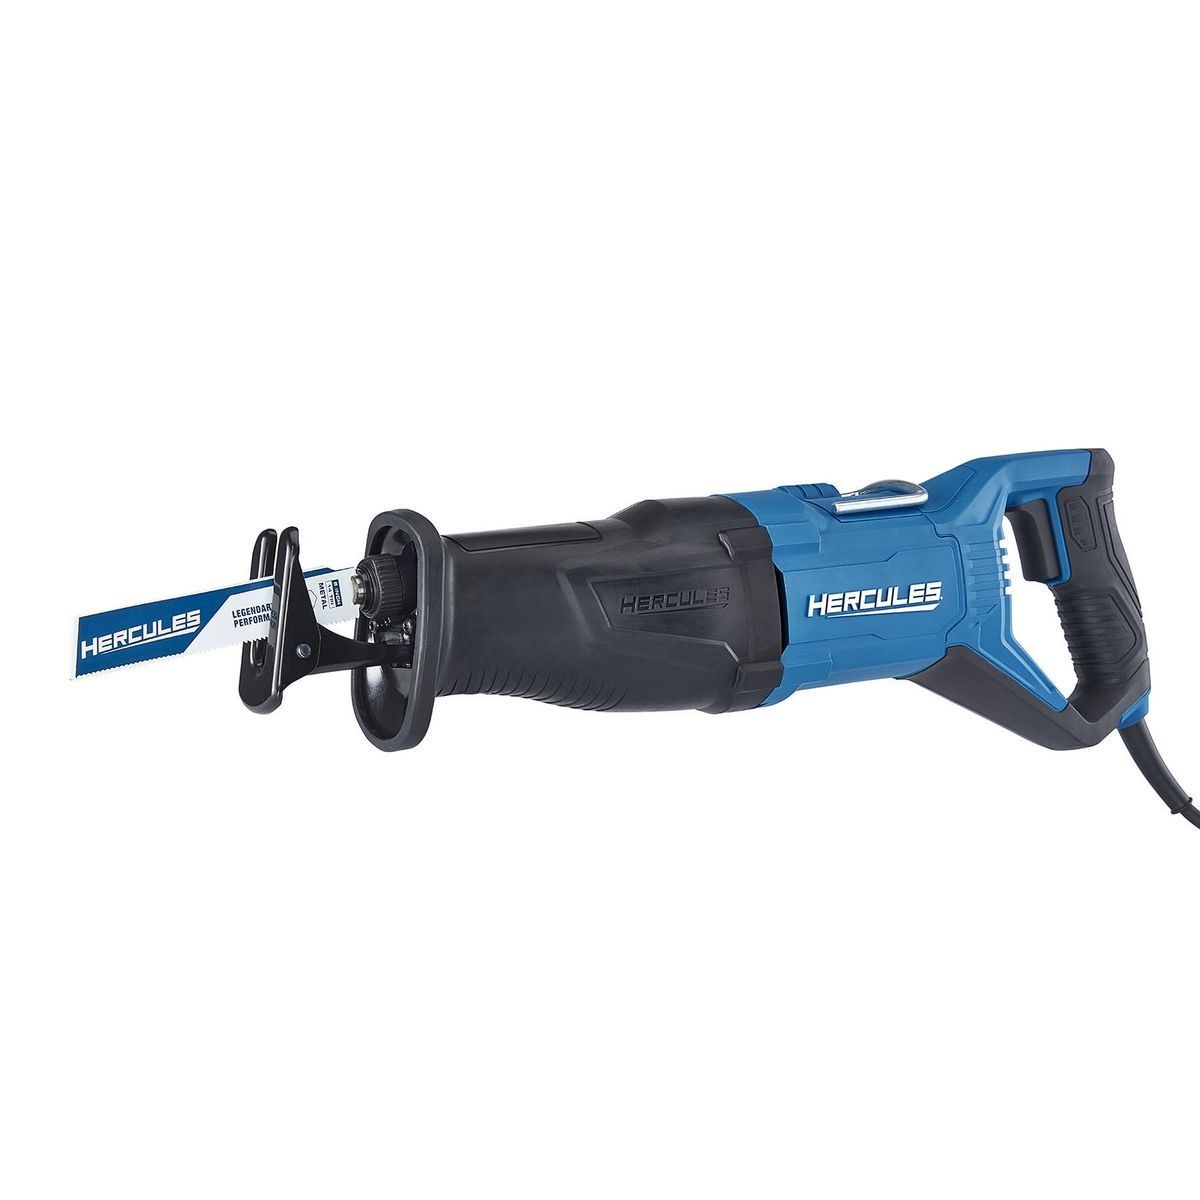 HERCULES 12 Amp Variable Speed Reciprocating Saw